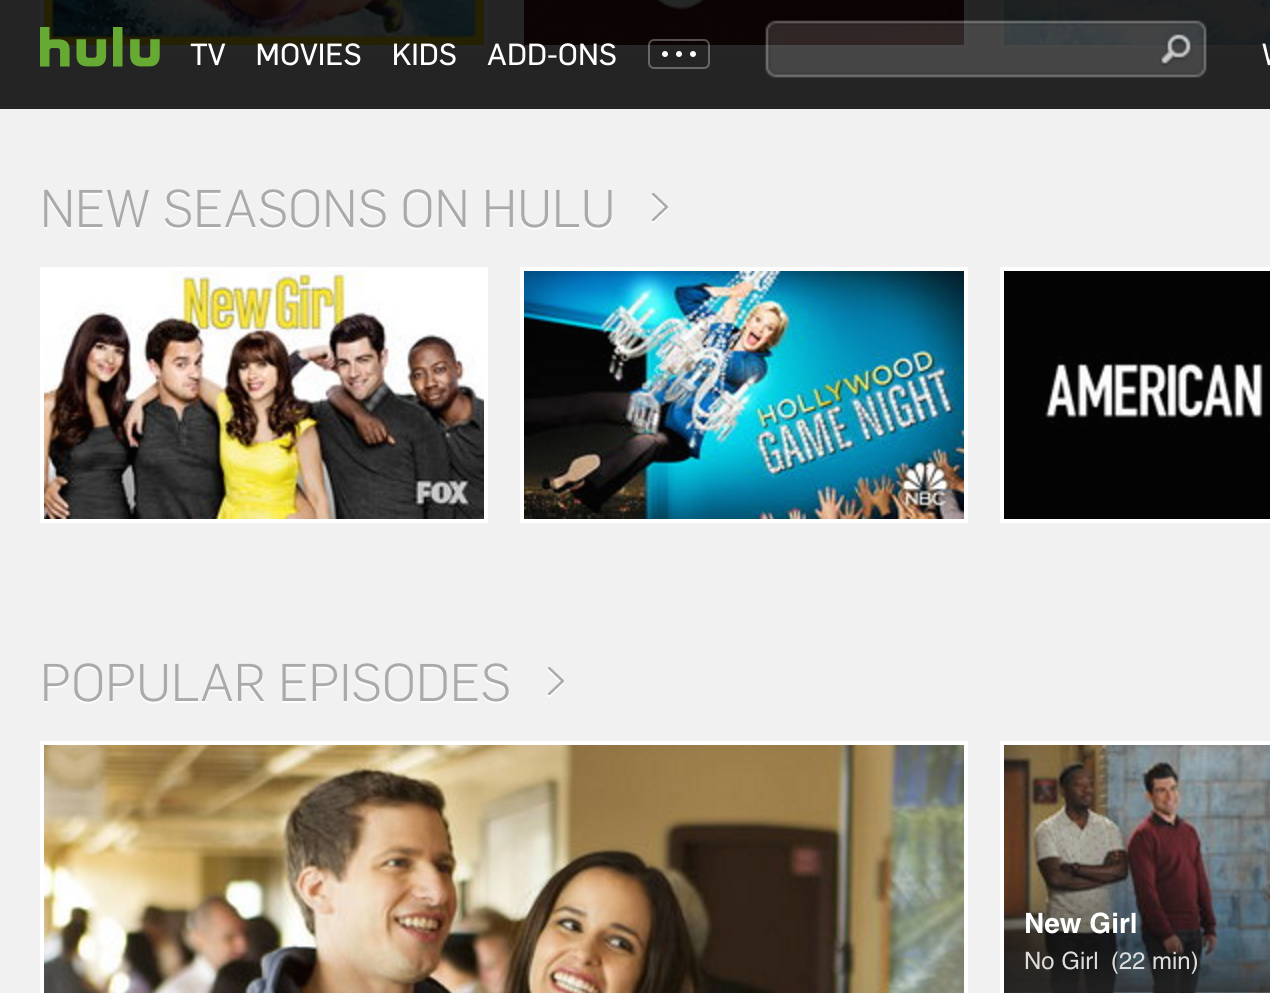 Time Warner Wants Hulu To Stop Airing Current Seasons Of TV Shows